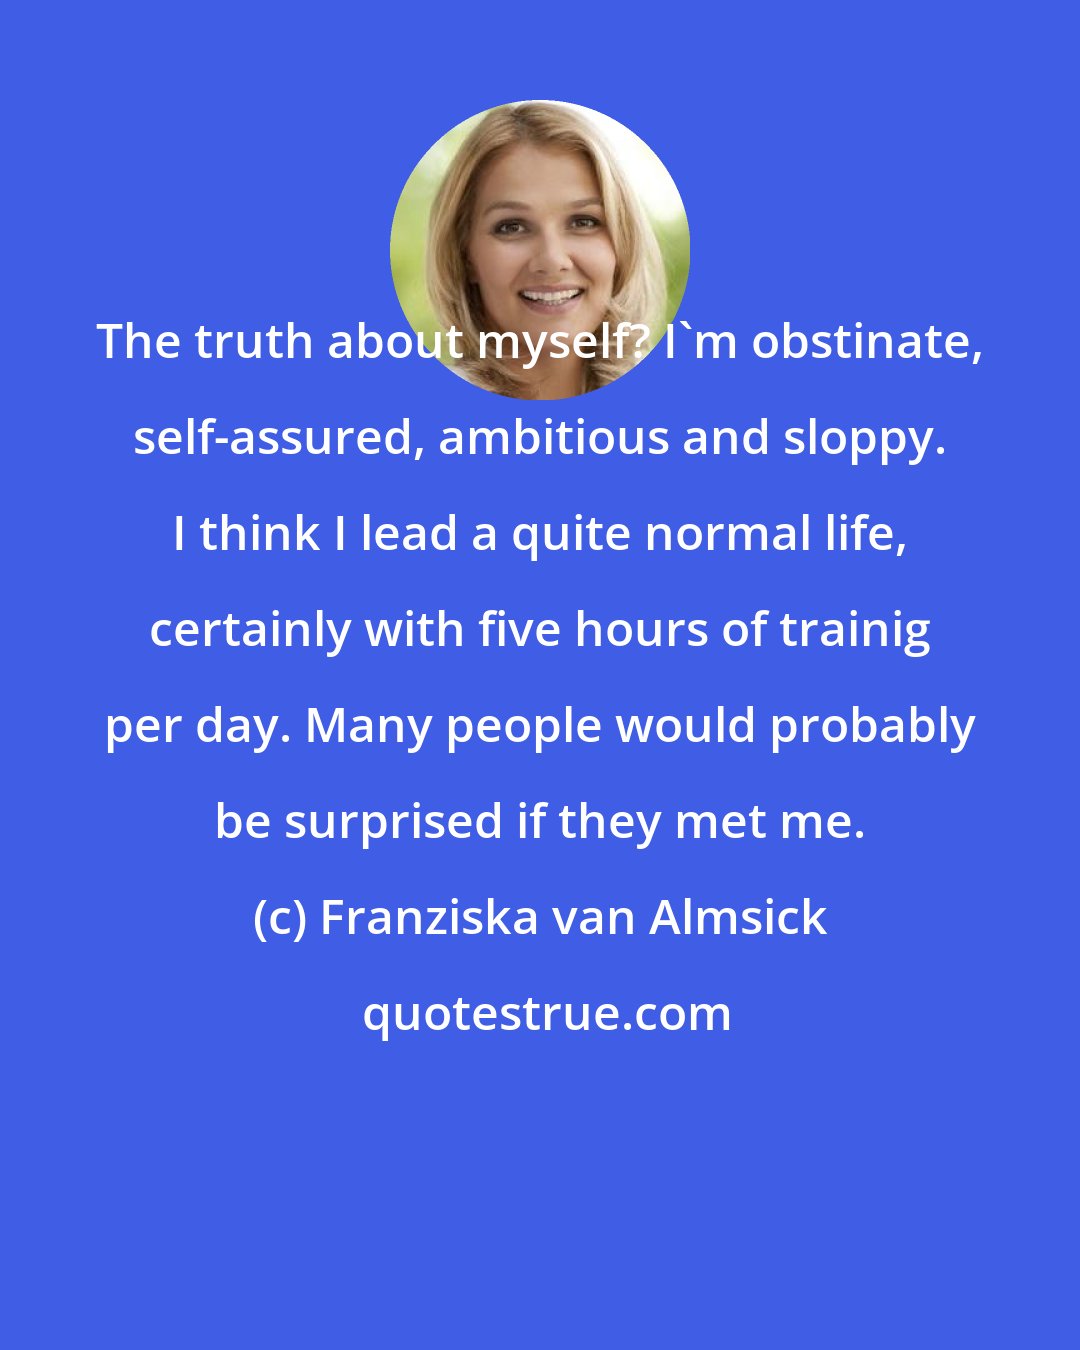 Franziska van Almsick: The truth about myself? I'm obstinate, self-assured, ambitious and sloppy. I think I lead a quite normal life, certainly with five hours of trainig per day. Many people would probably be surprised if they met me.